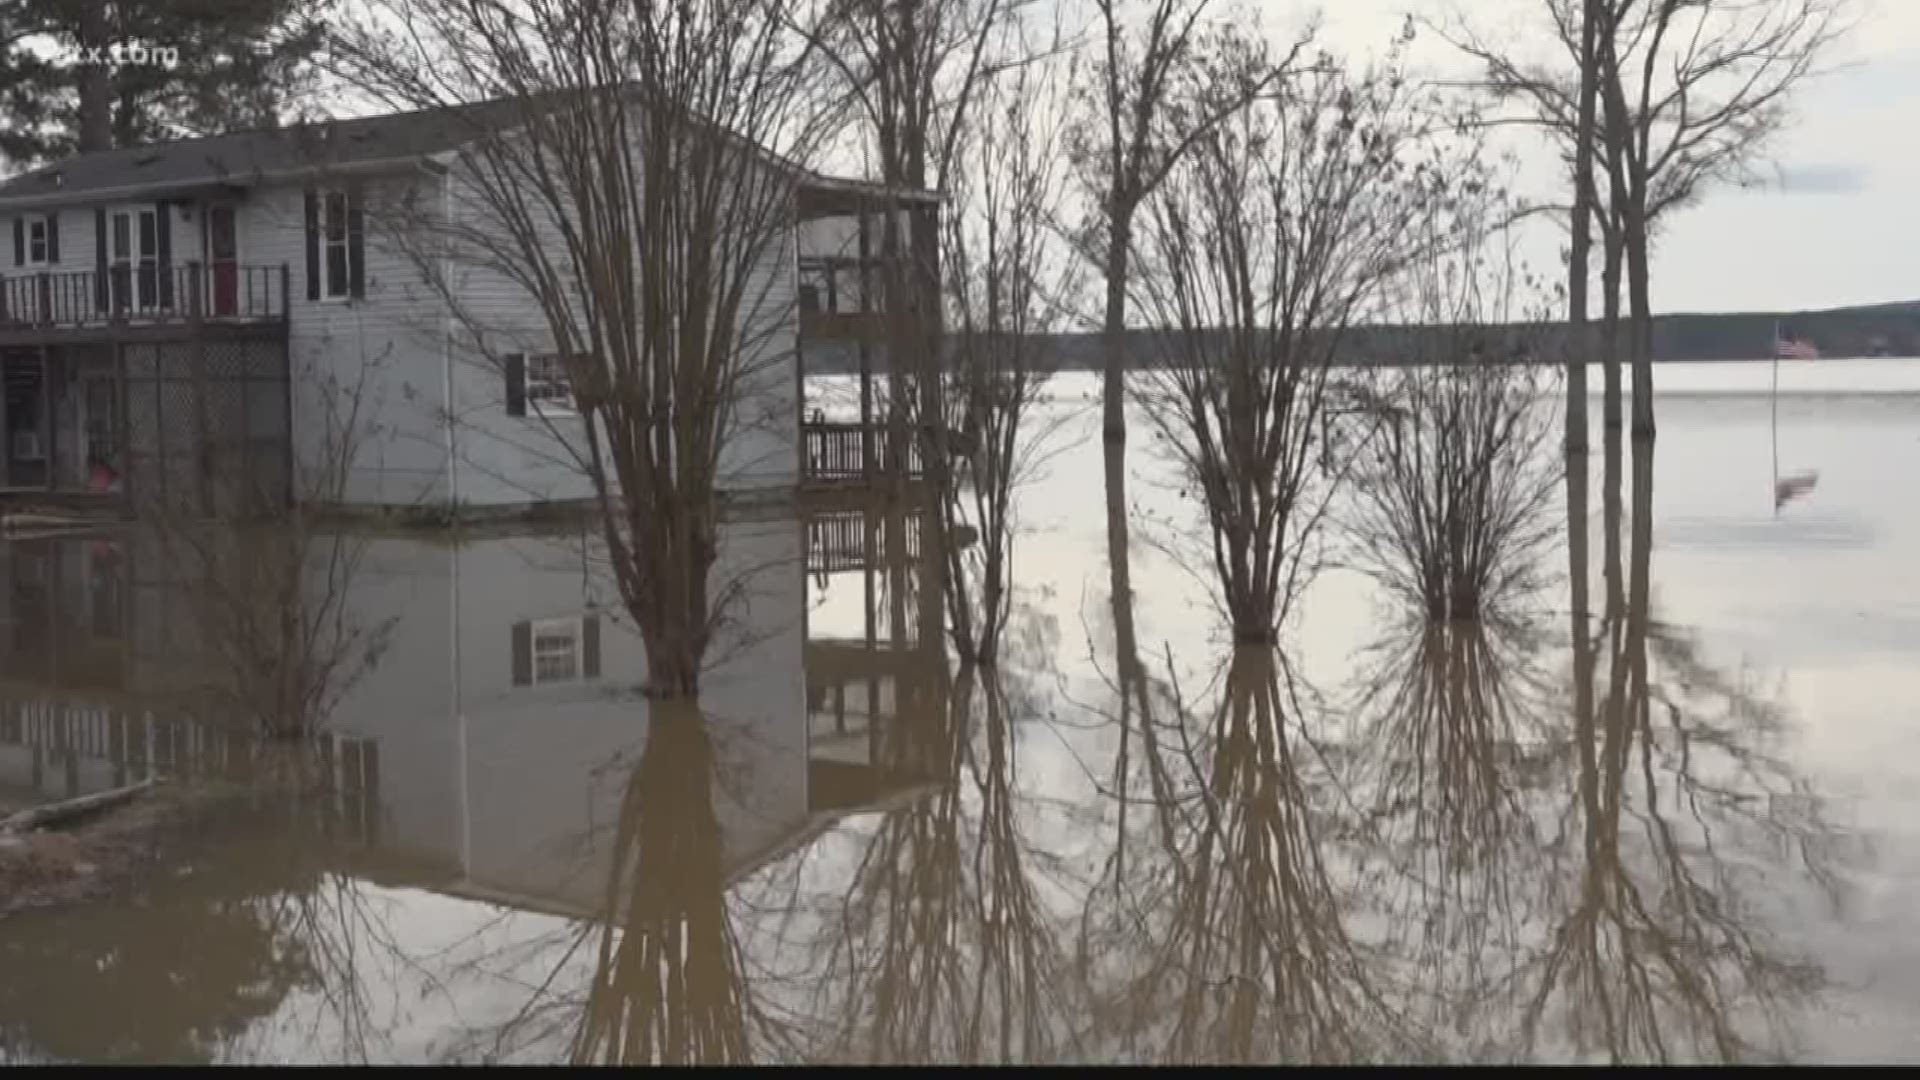 It has been several days since heavy rains hit the Midlands, and right here on Lake Wateree residents are still feeling the effects of the storm